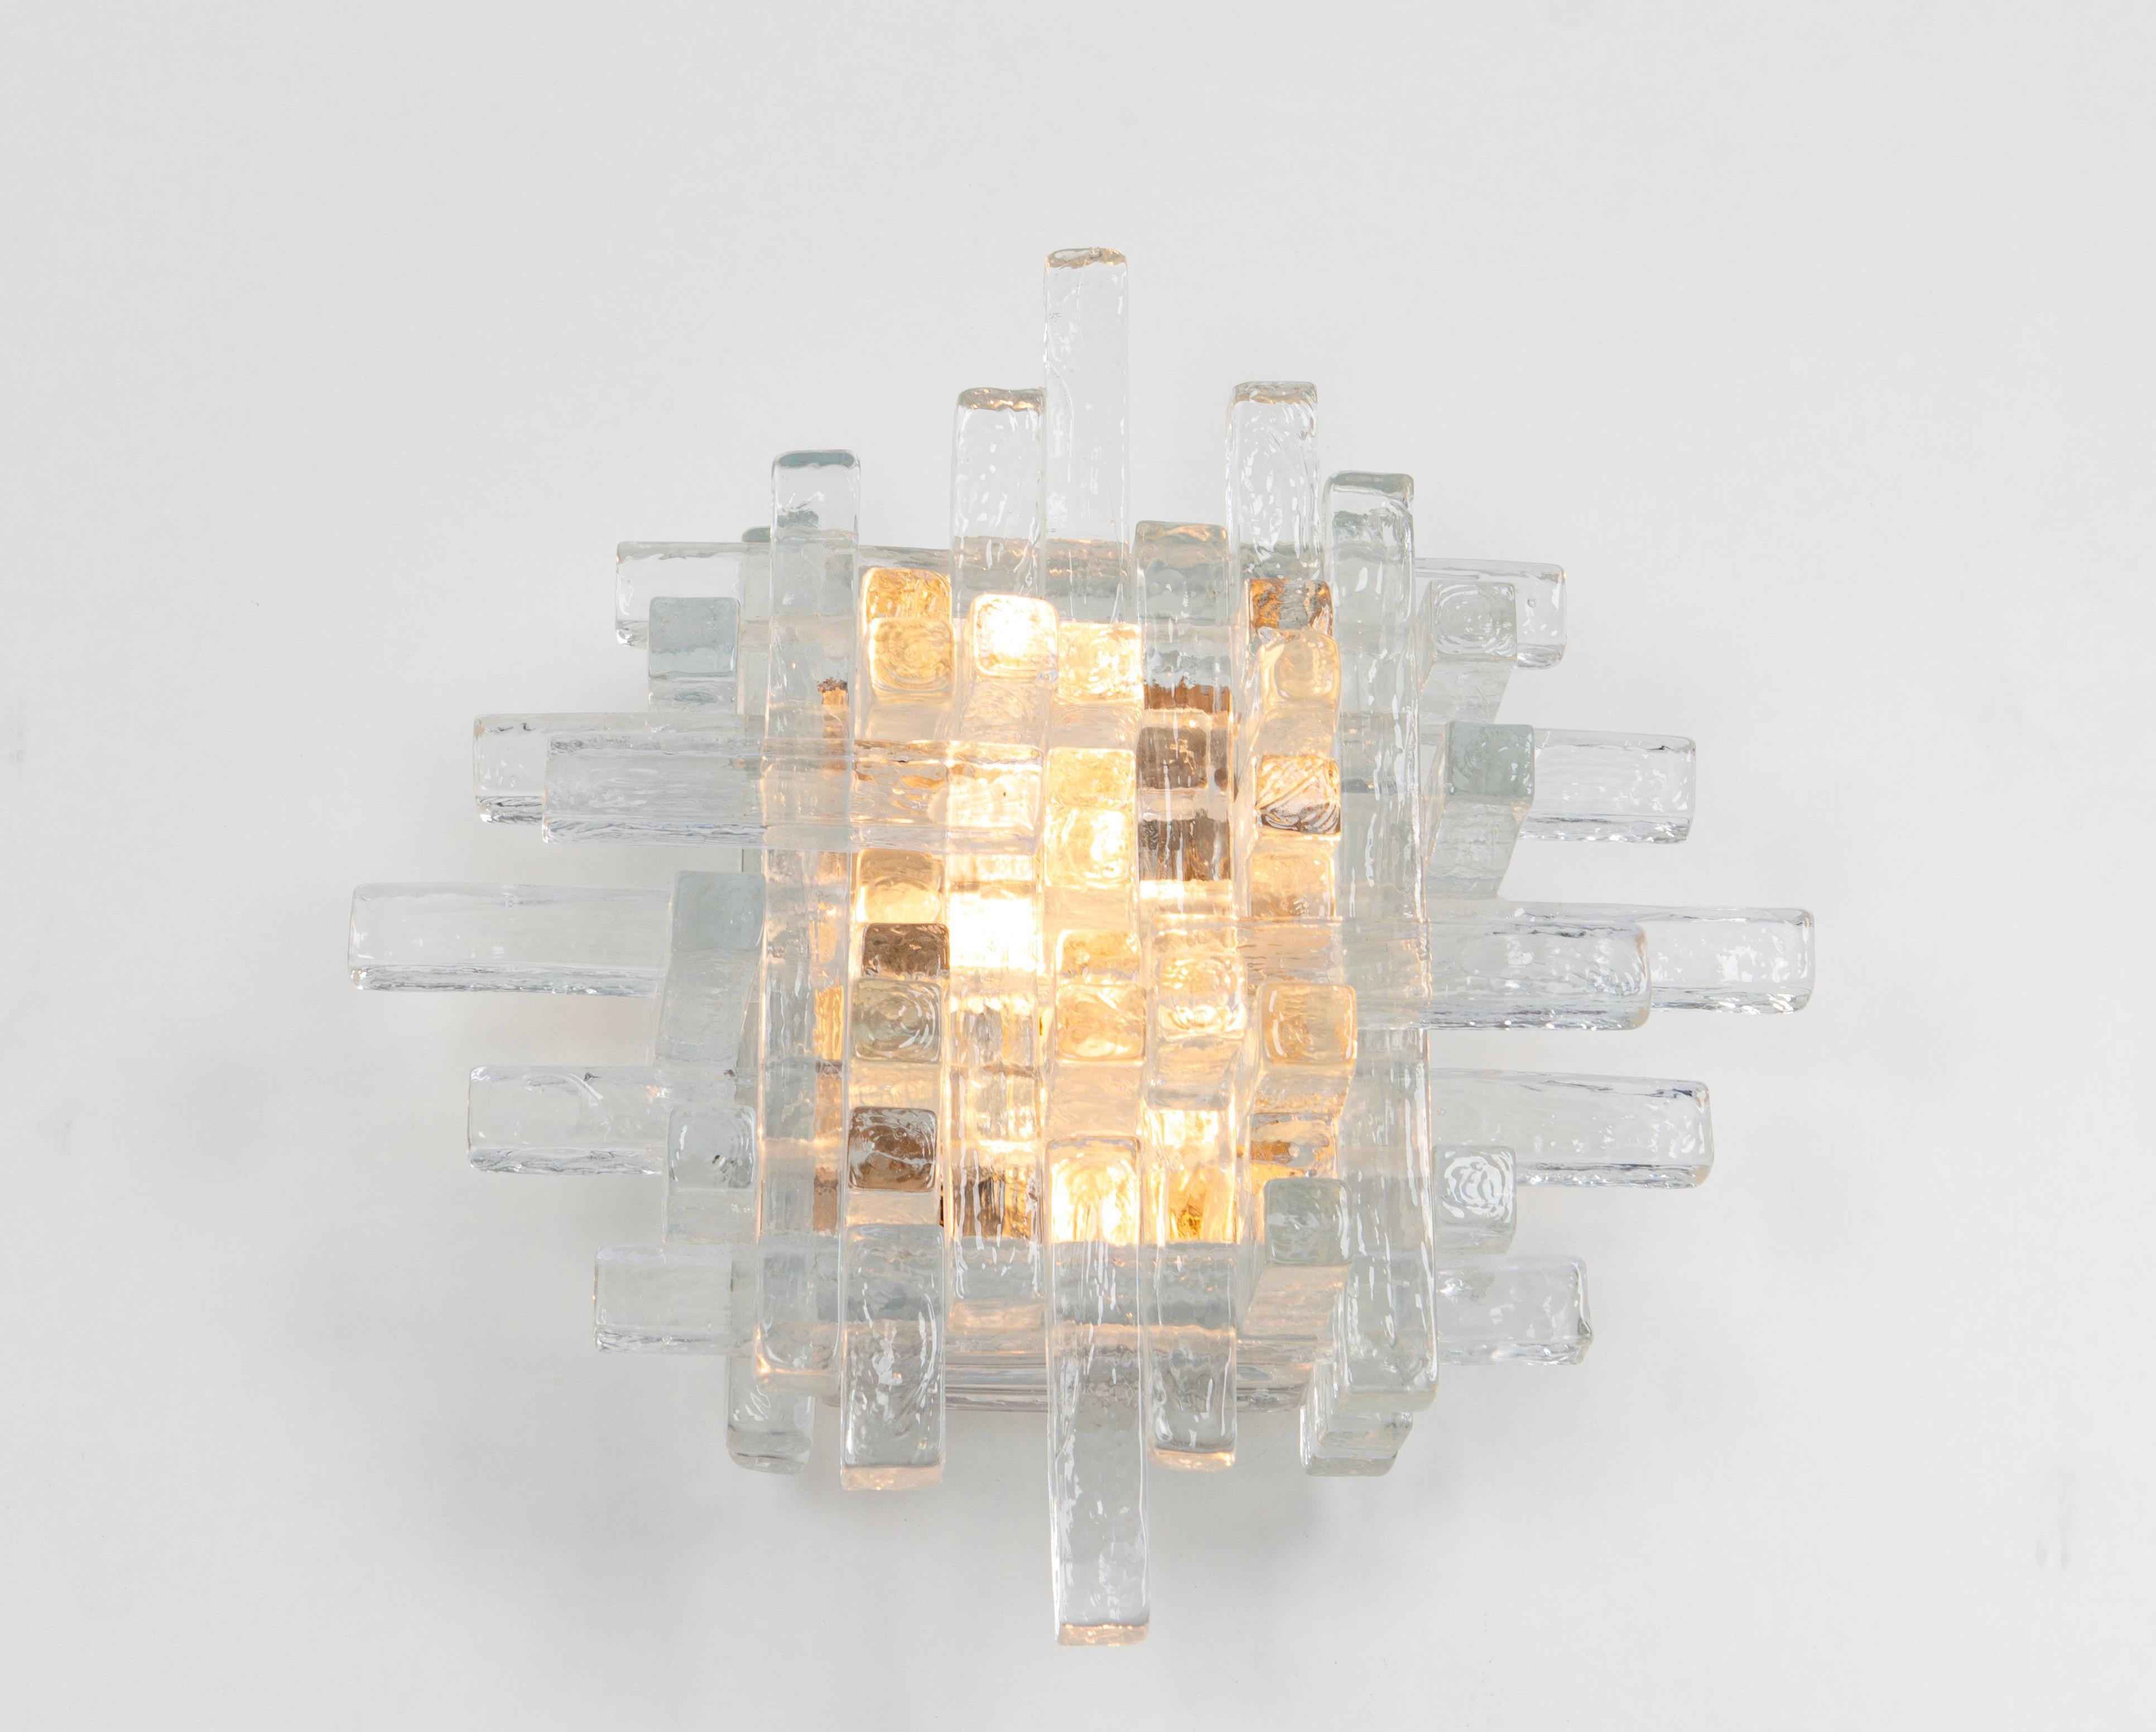 Brutalist mid-century wall sconce sconce by Albano Poli for Poliarte, 1970s
Poliarte Italy, sconce / wall applique, 1960s. 
It's composed of dozens of glass rectangles of different sizes stacked together. The glass is clear but textured. Holds two